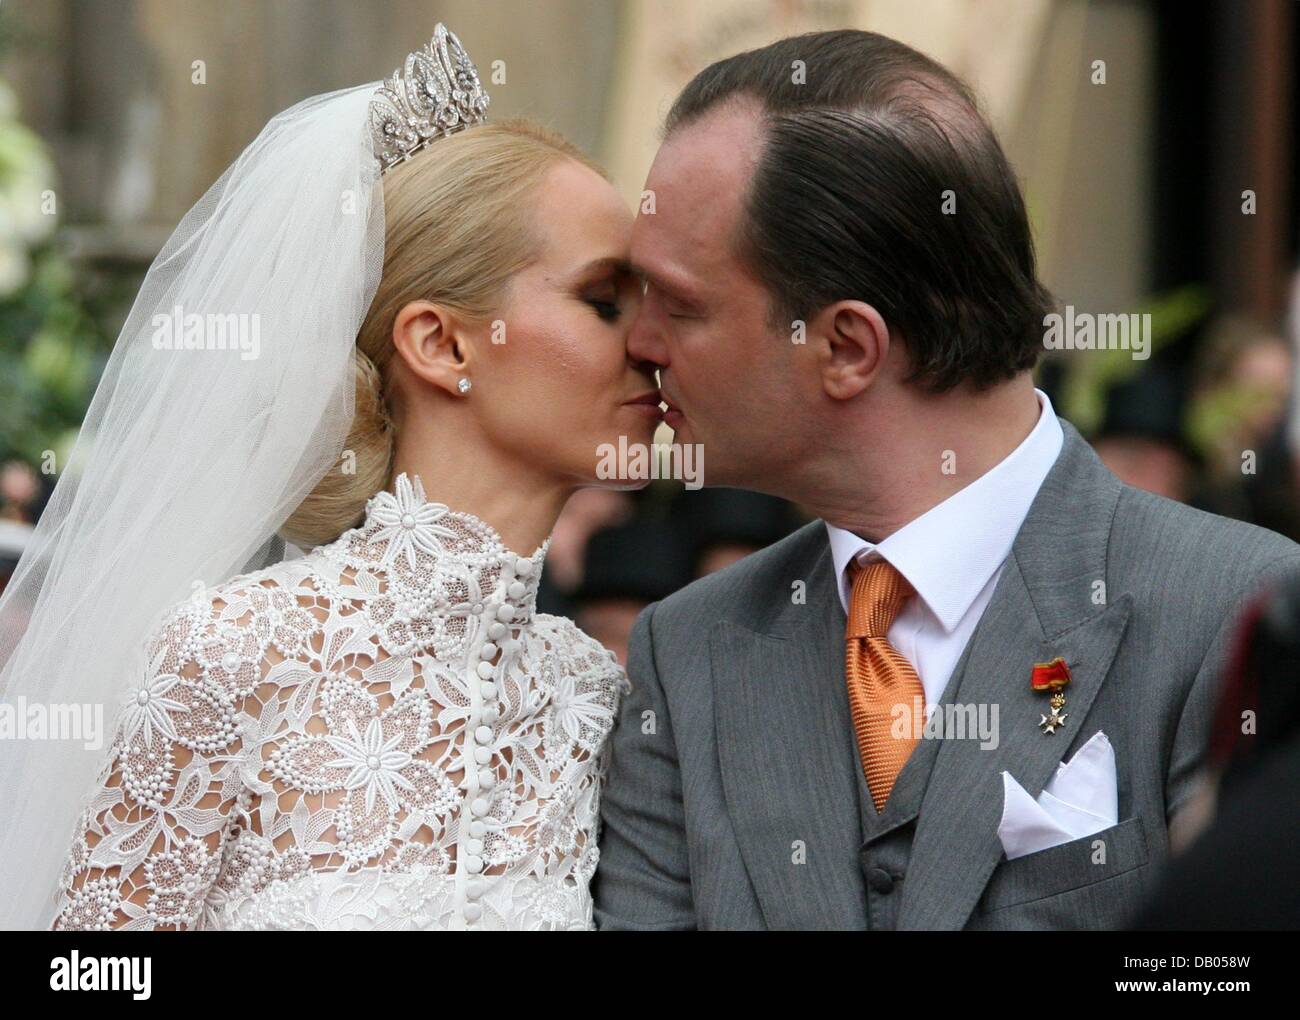 The married couple Alexander, Prince of Schaumburg-Lippe, and Nadja Anna, Princess of Schaumburg-Lippe, kiss after their church wedding in Bueckeburg, Germany, 30 June 2007. Politicians, royals and celebrities were under the 750 invited guests. Photo: Jochen Luebke Stock Photo